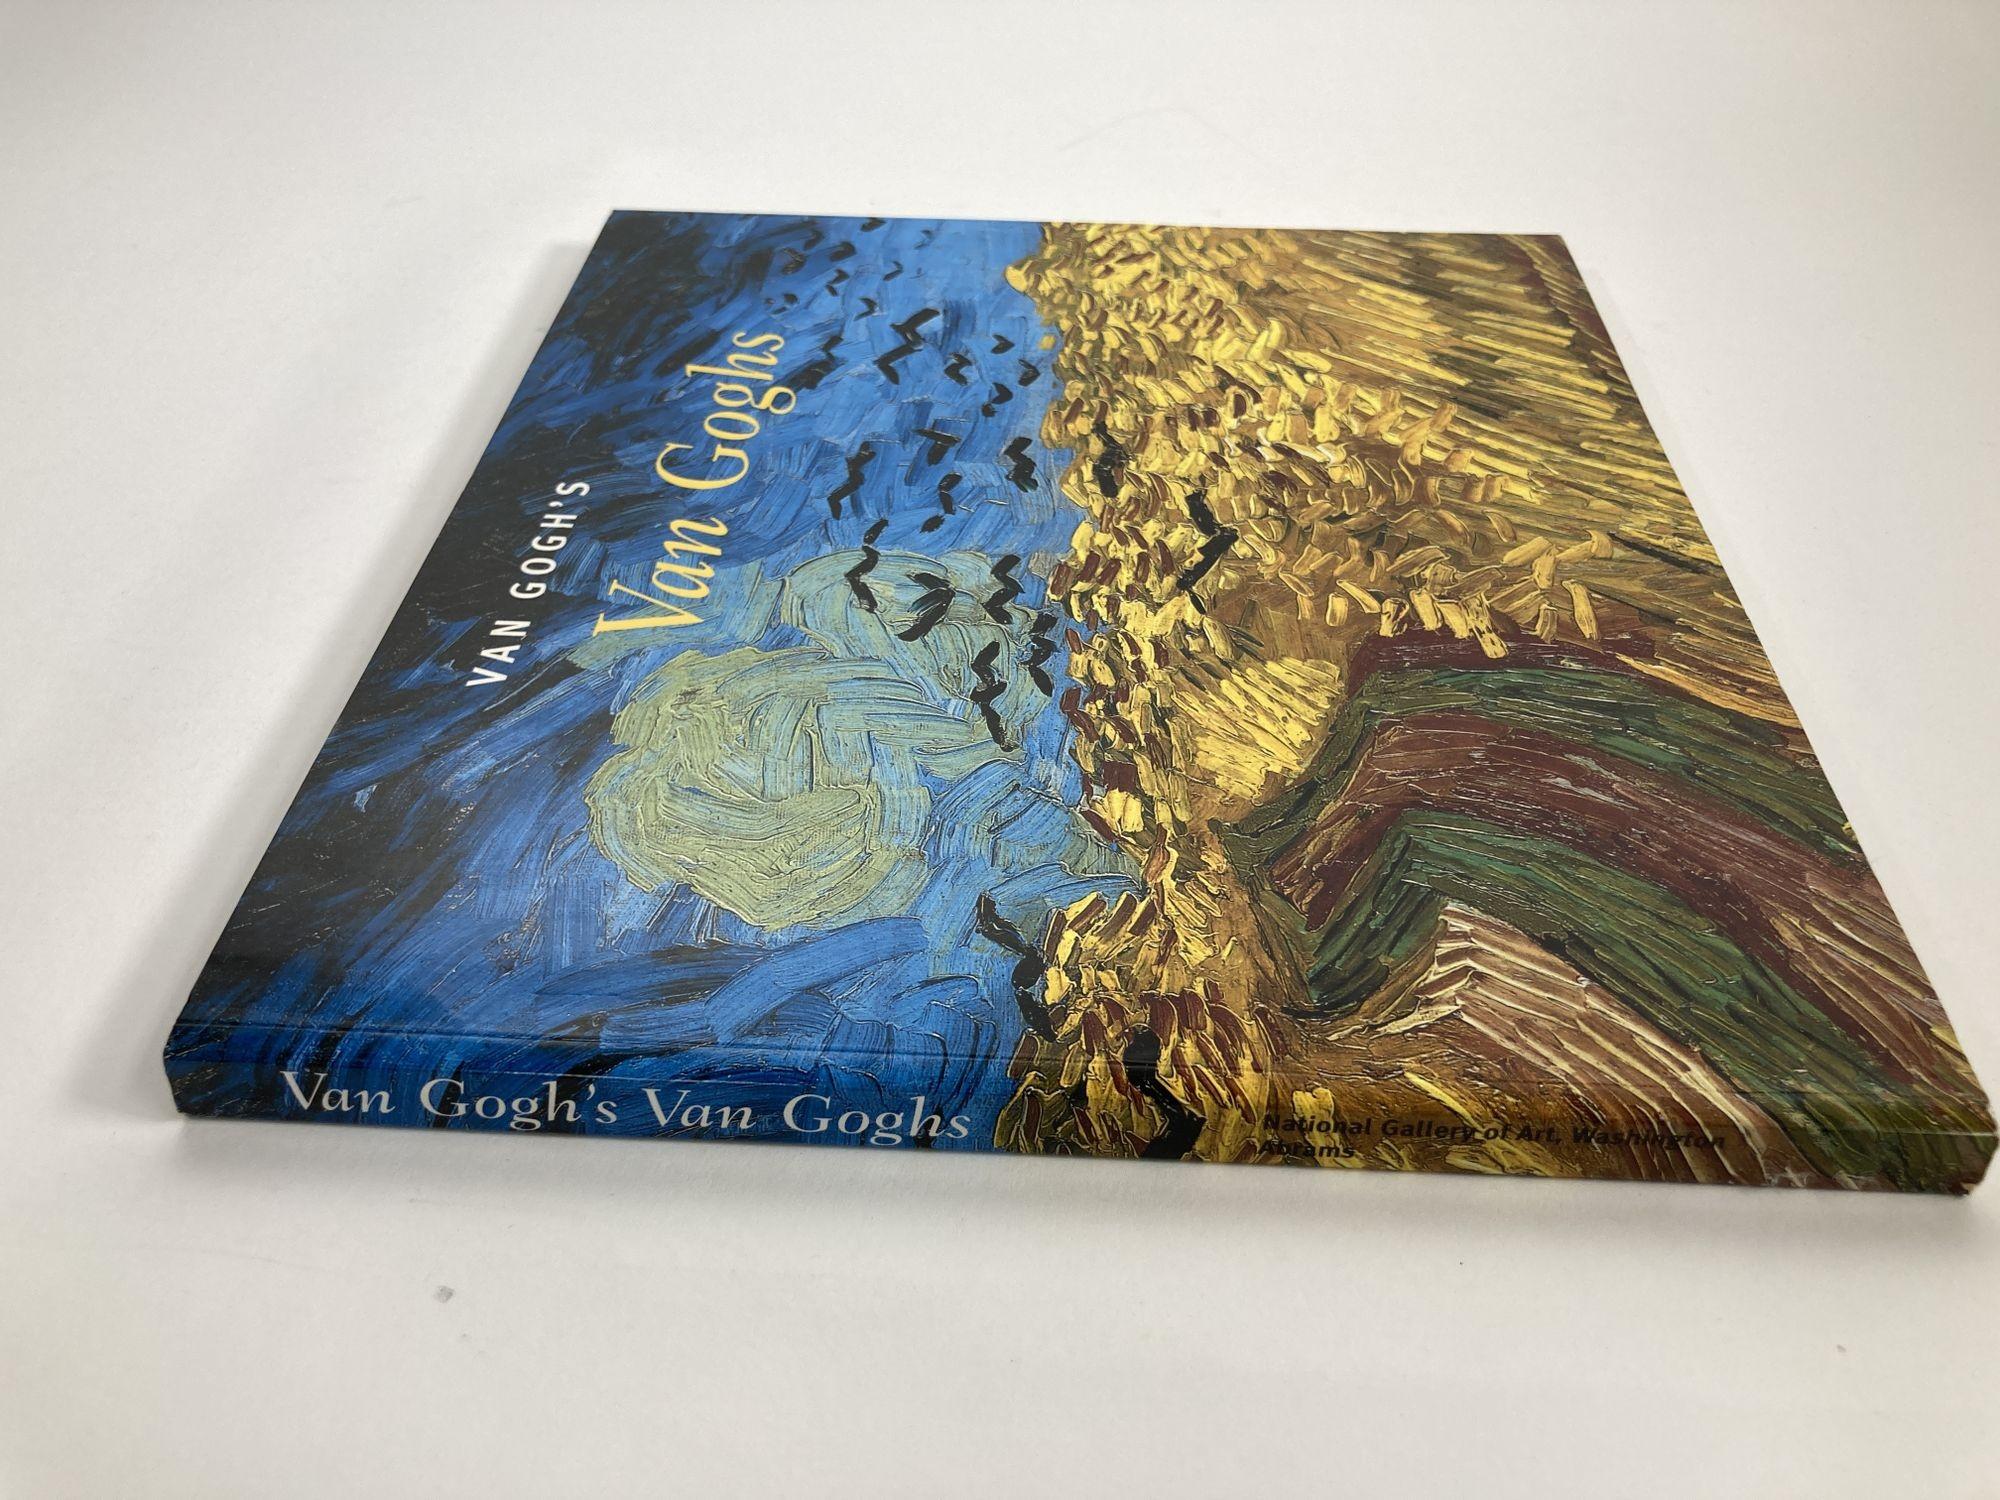 Expressionist Van Gogh's Van Goghs: Masterpieces from the Van Gogh Museum, Amsterdam Book For Sale